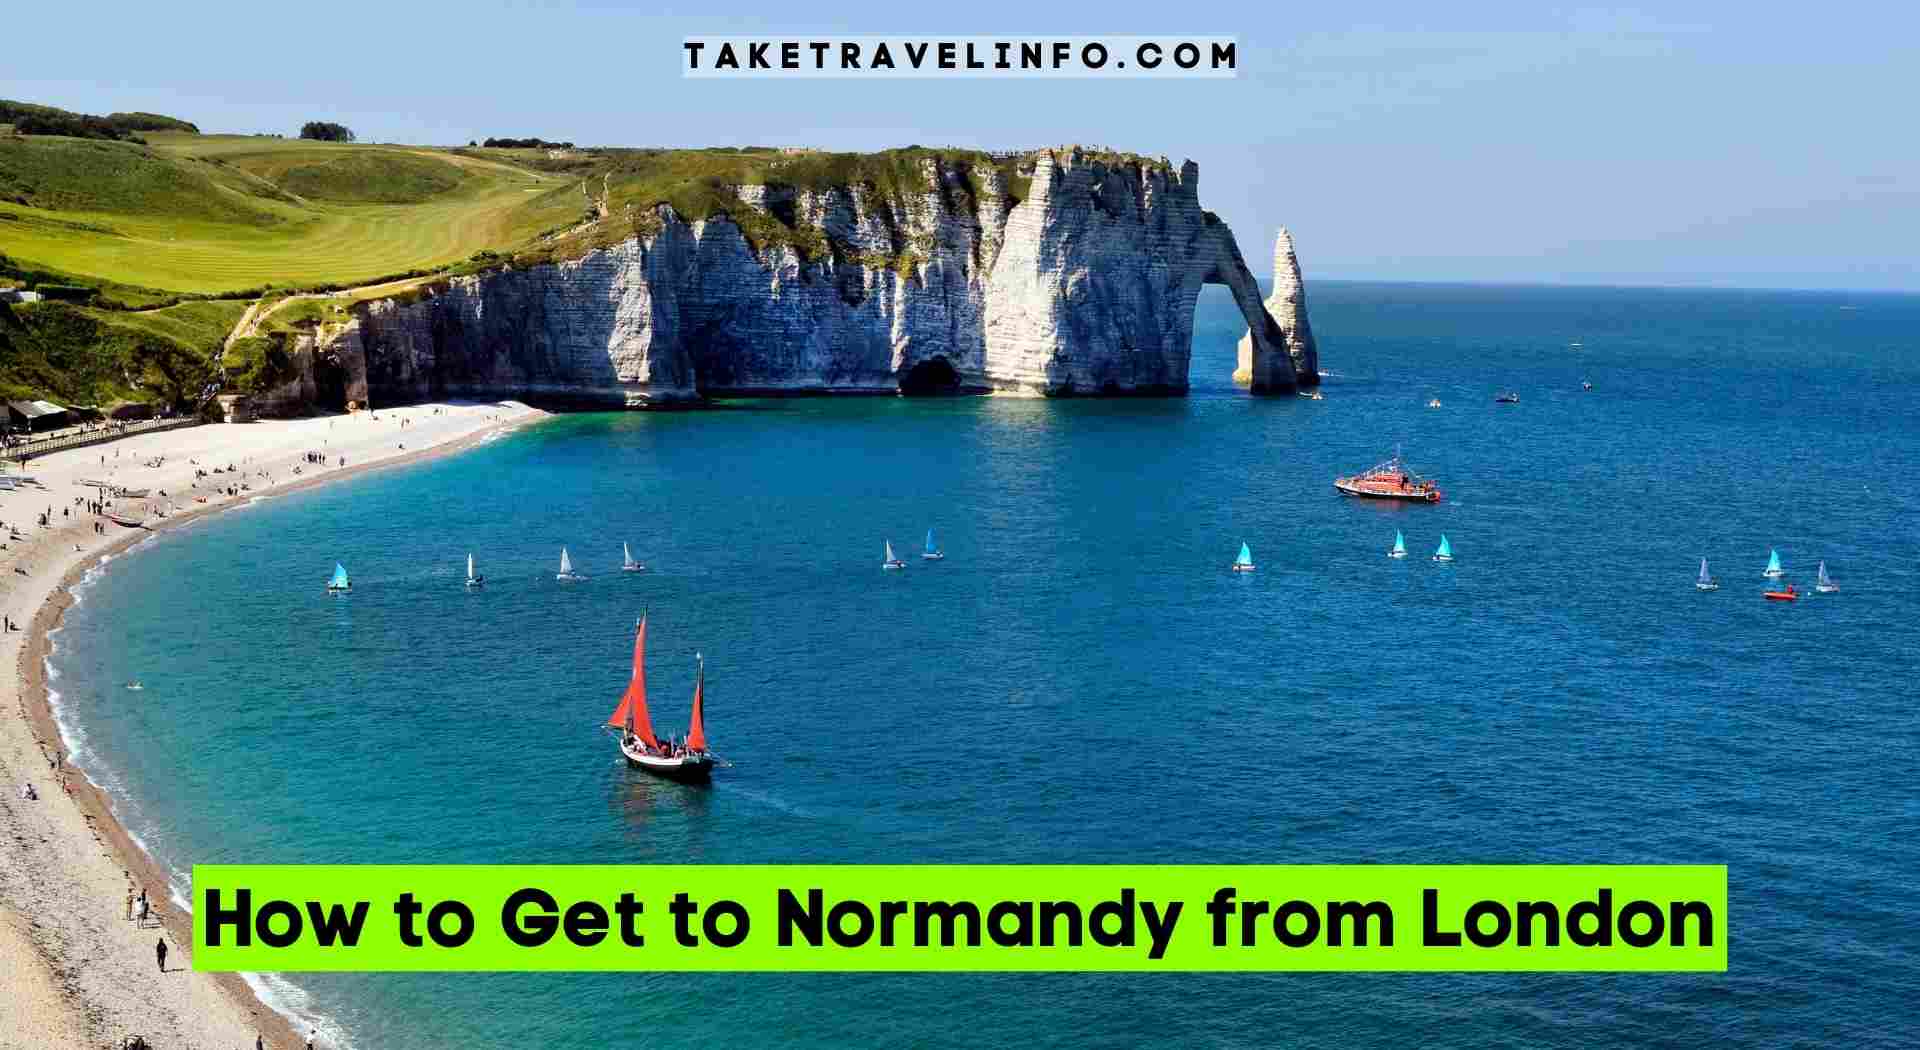 How to Get to Normandy from London